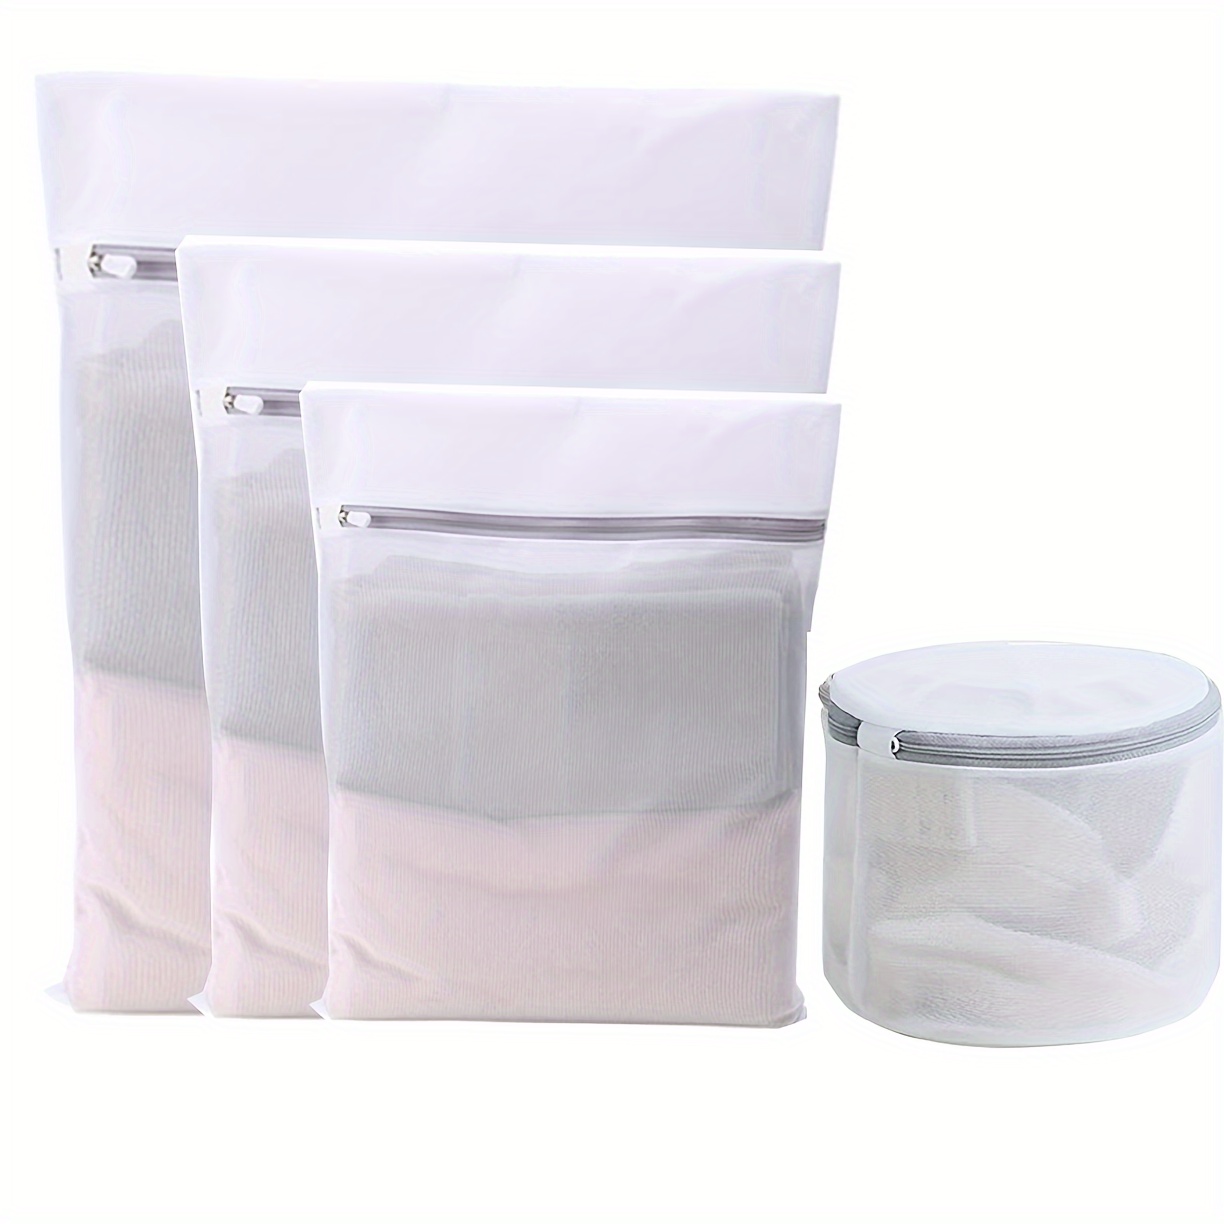 Mesh Laundry Bags for Delicates with Premium Zipper, Travel Storage  Organize Bag, Clothing Washing Bags for Laundry, Blouse, Bra